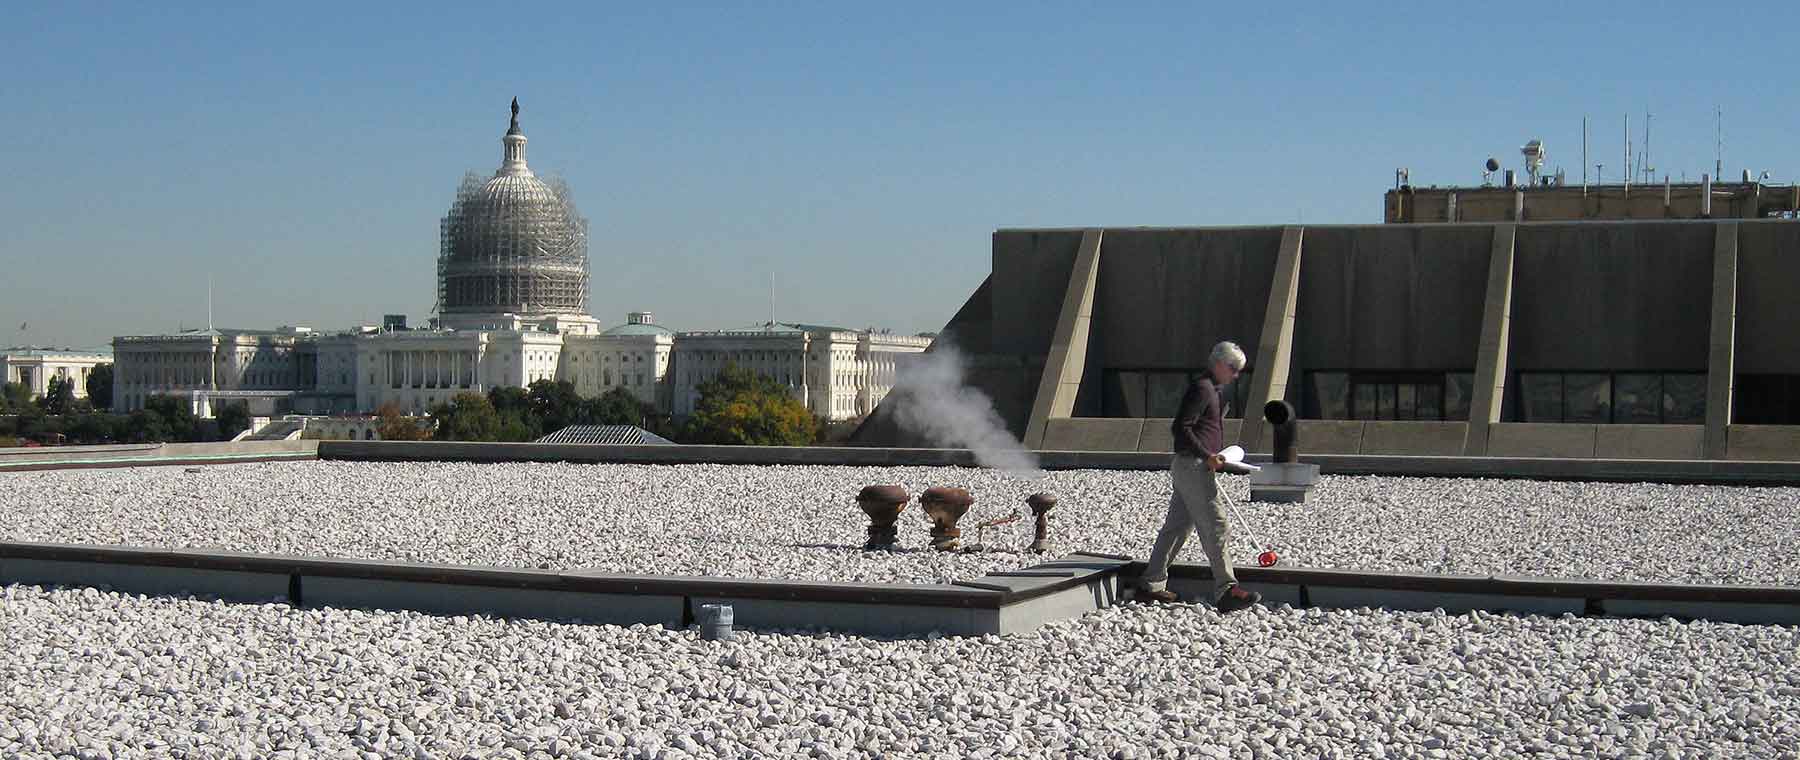 One man takes measurements atop a federal office building in Washington, D.C.